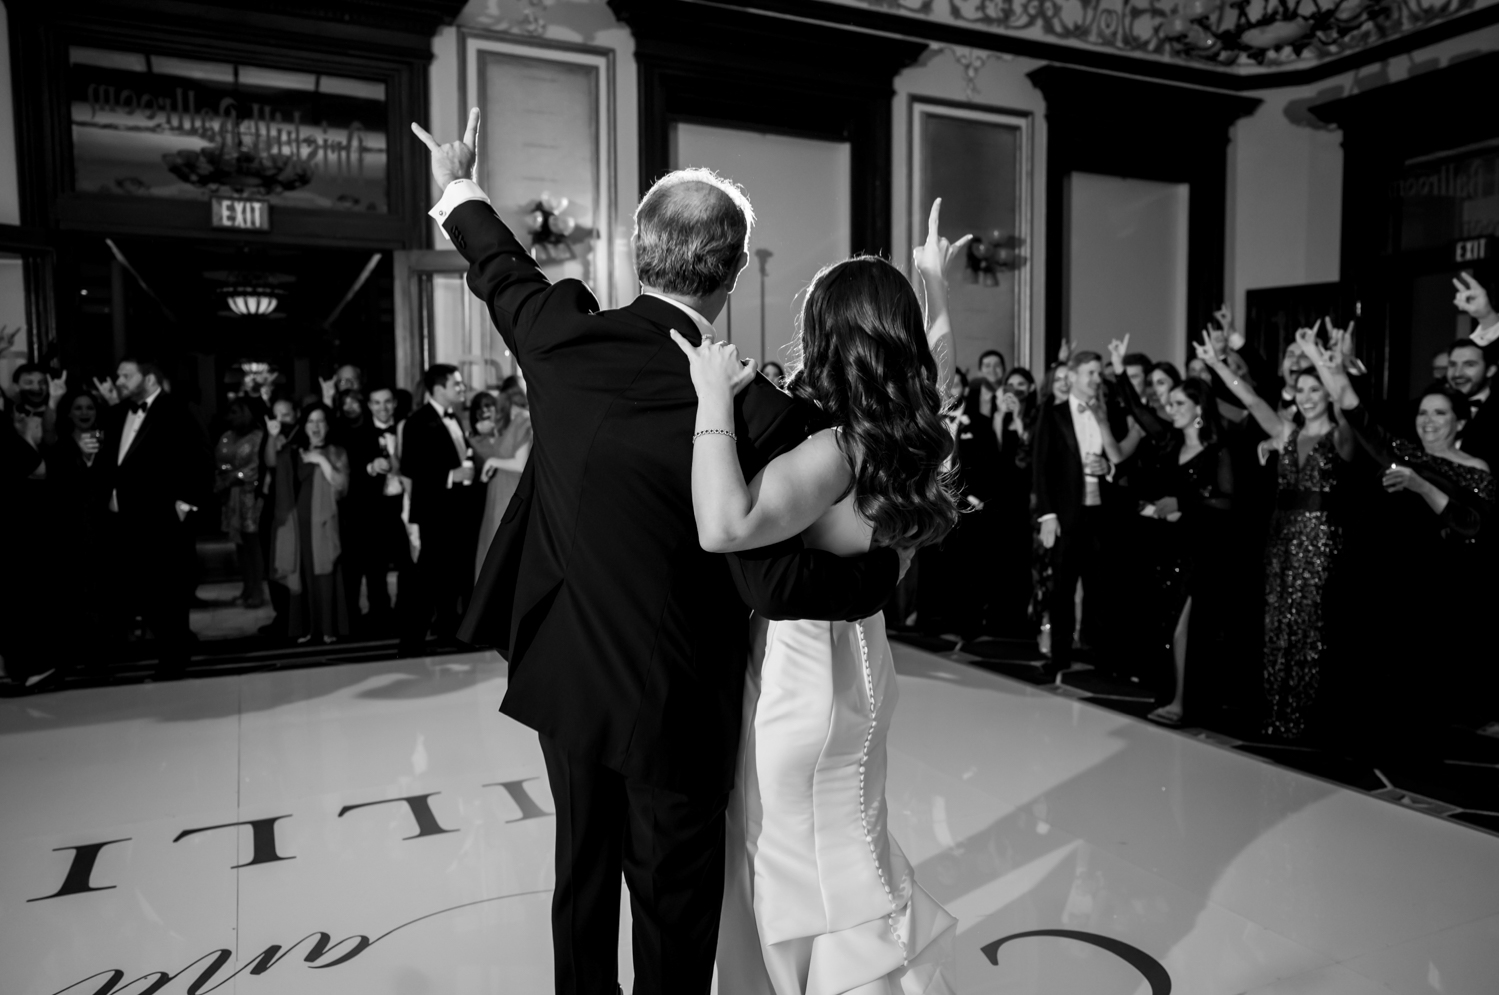 The bride and her dad face the crowd during their first dance and hold up the "hook-em" hand sign from The University of Texas at Austin.